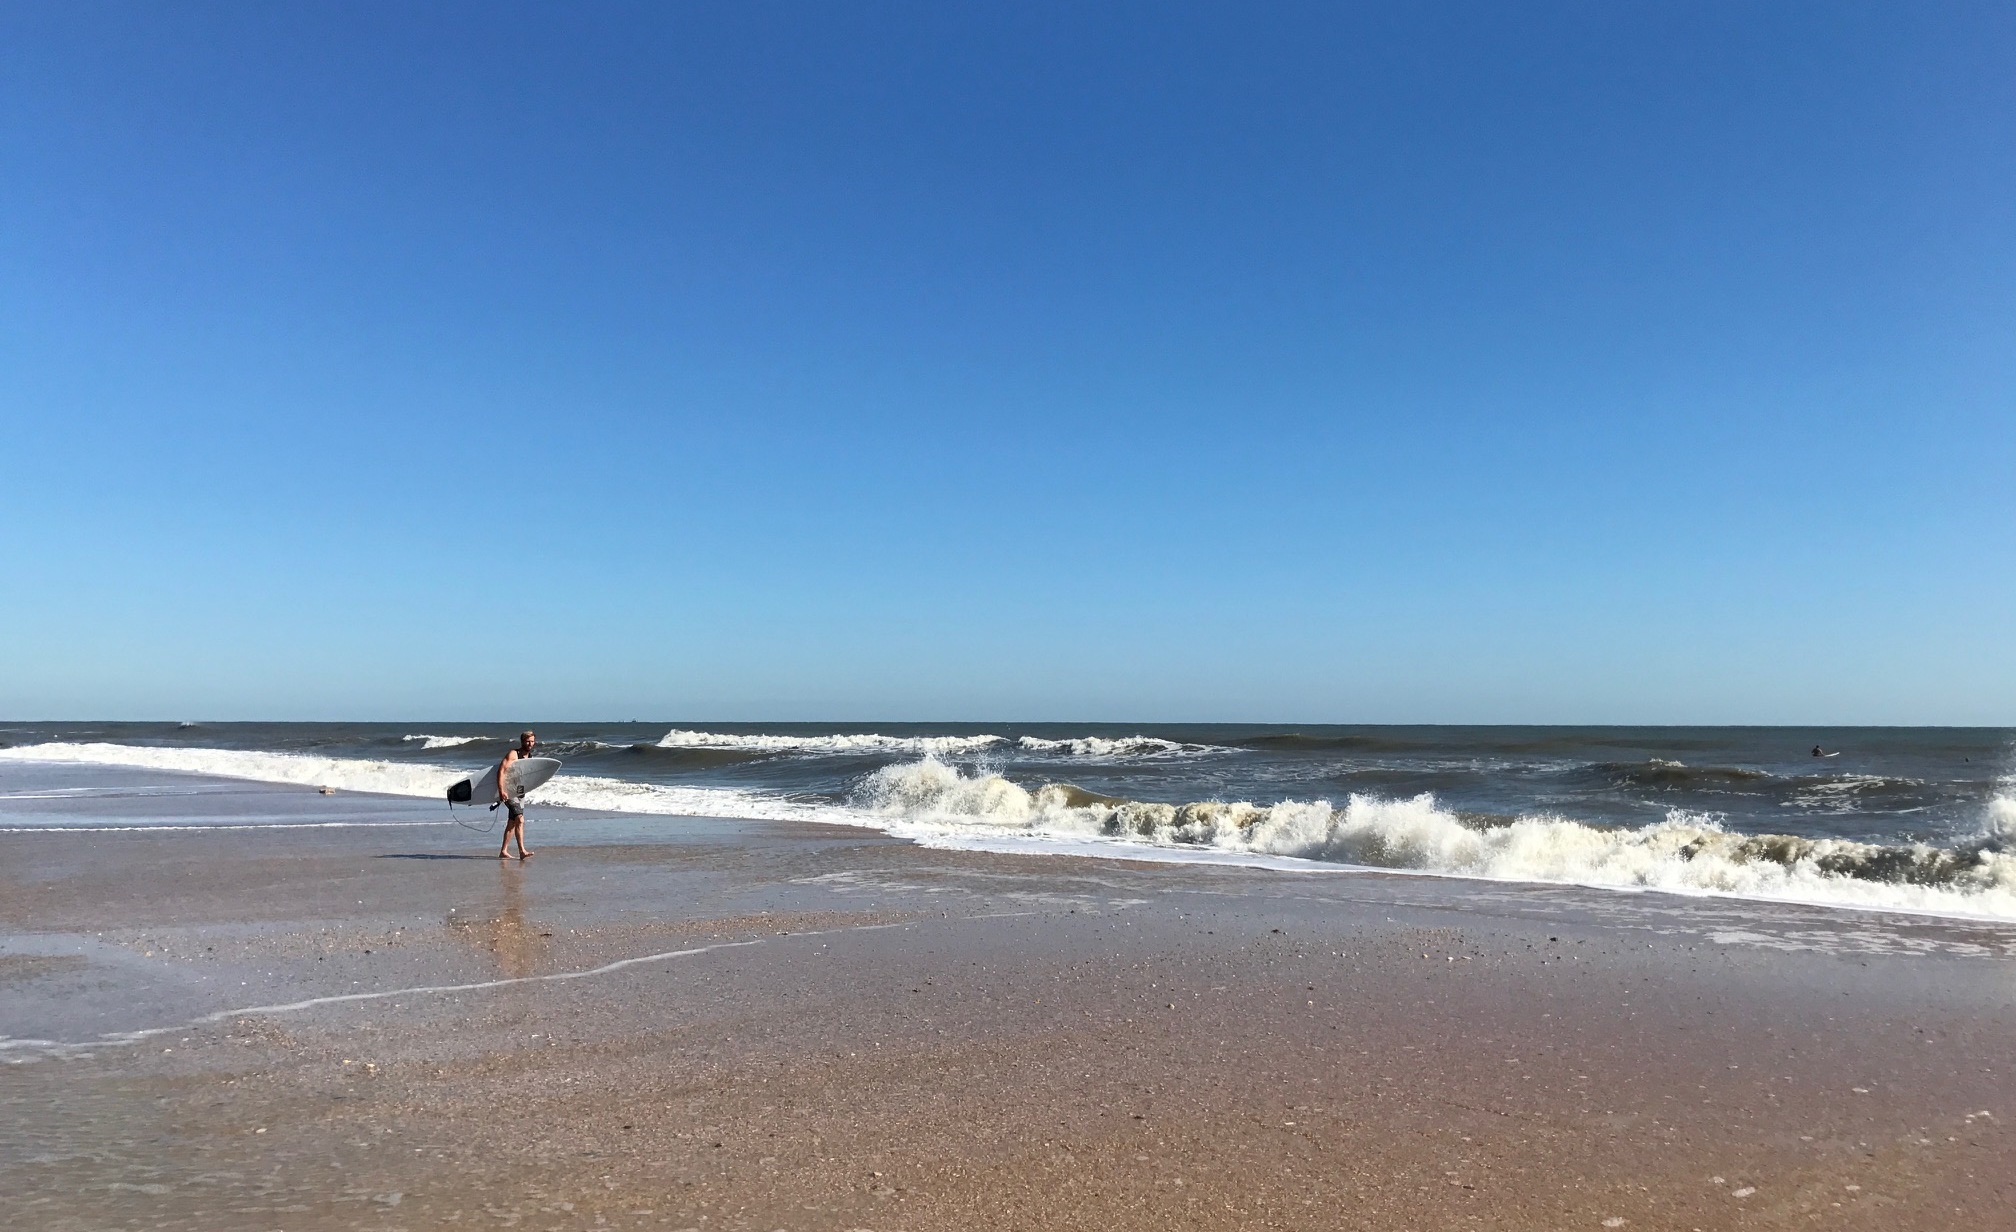 New beach access for the First Coast